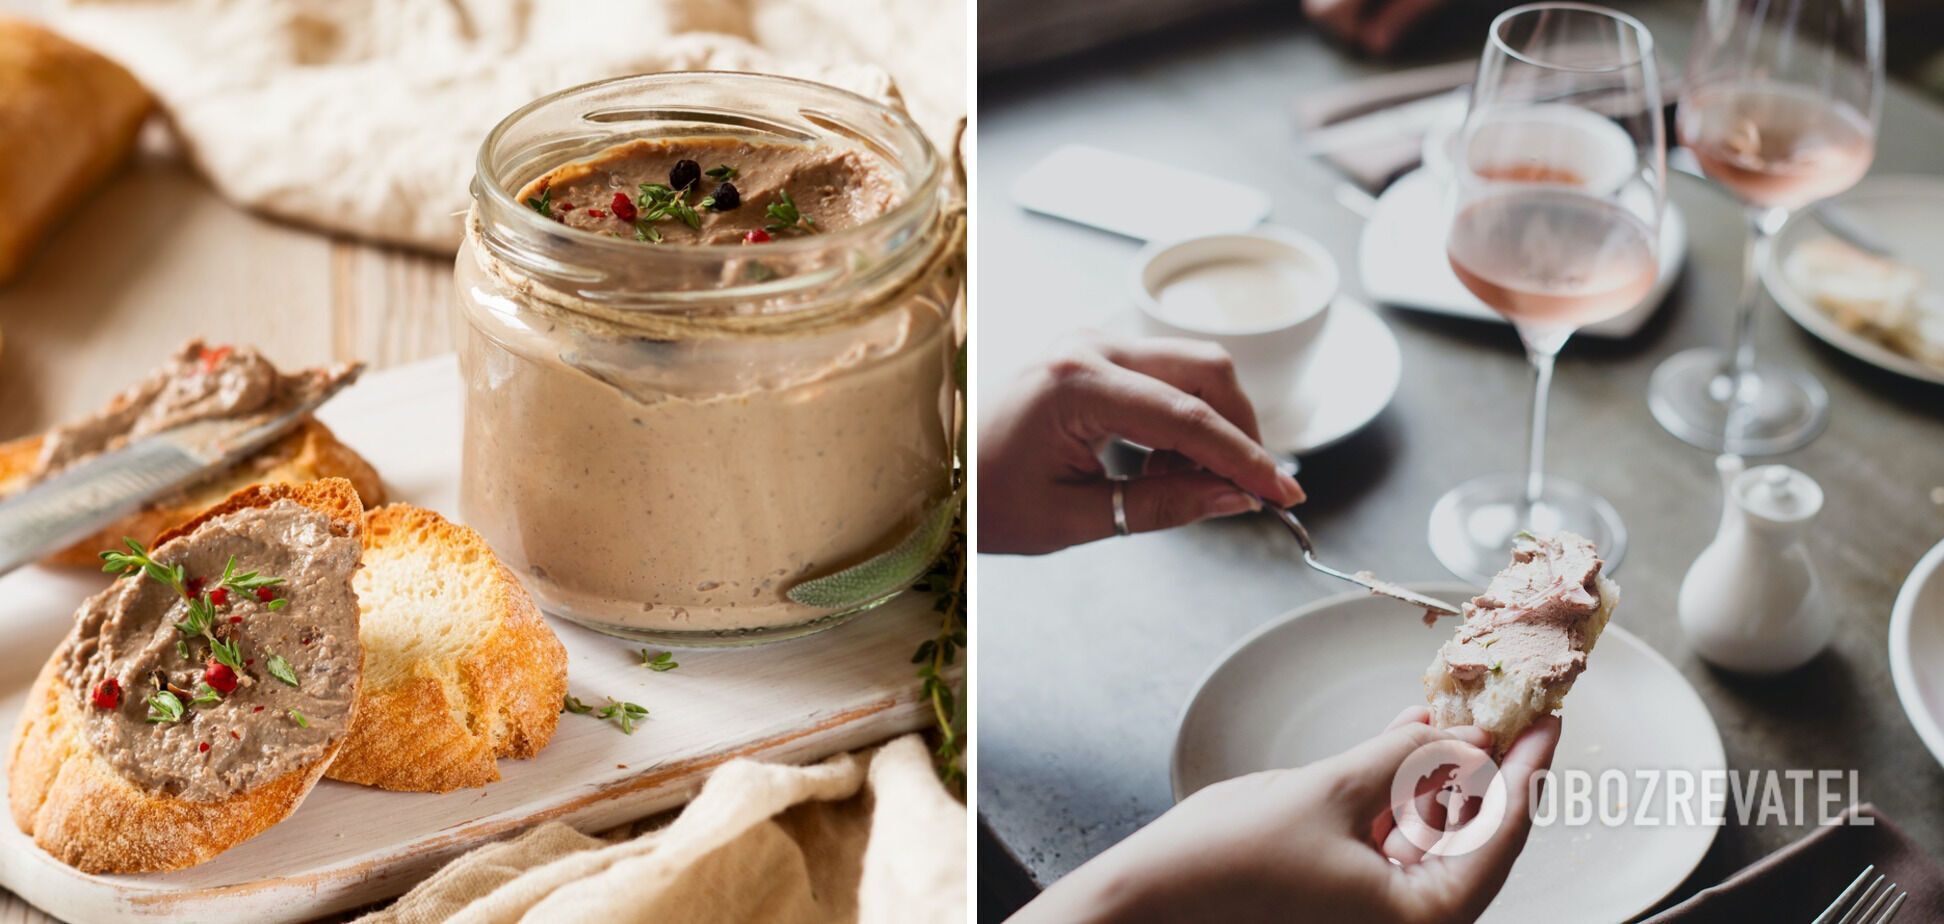 Chicken liver pate with an unusual ingredient: we tell you what to add for an original taste